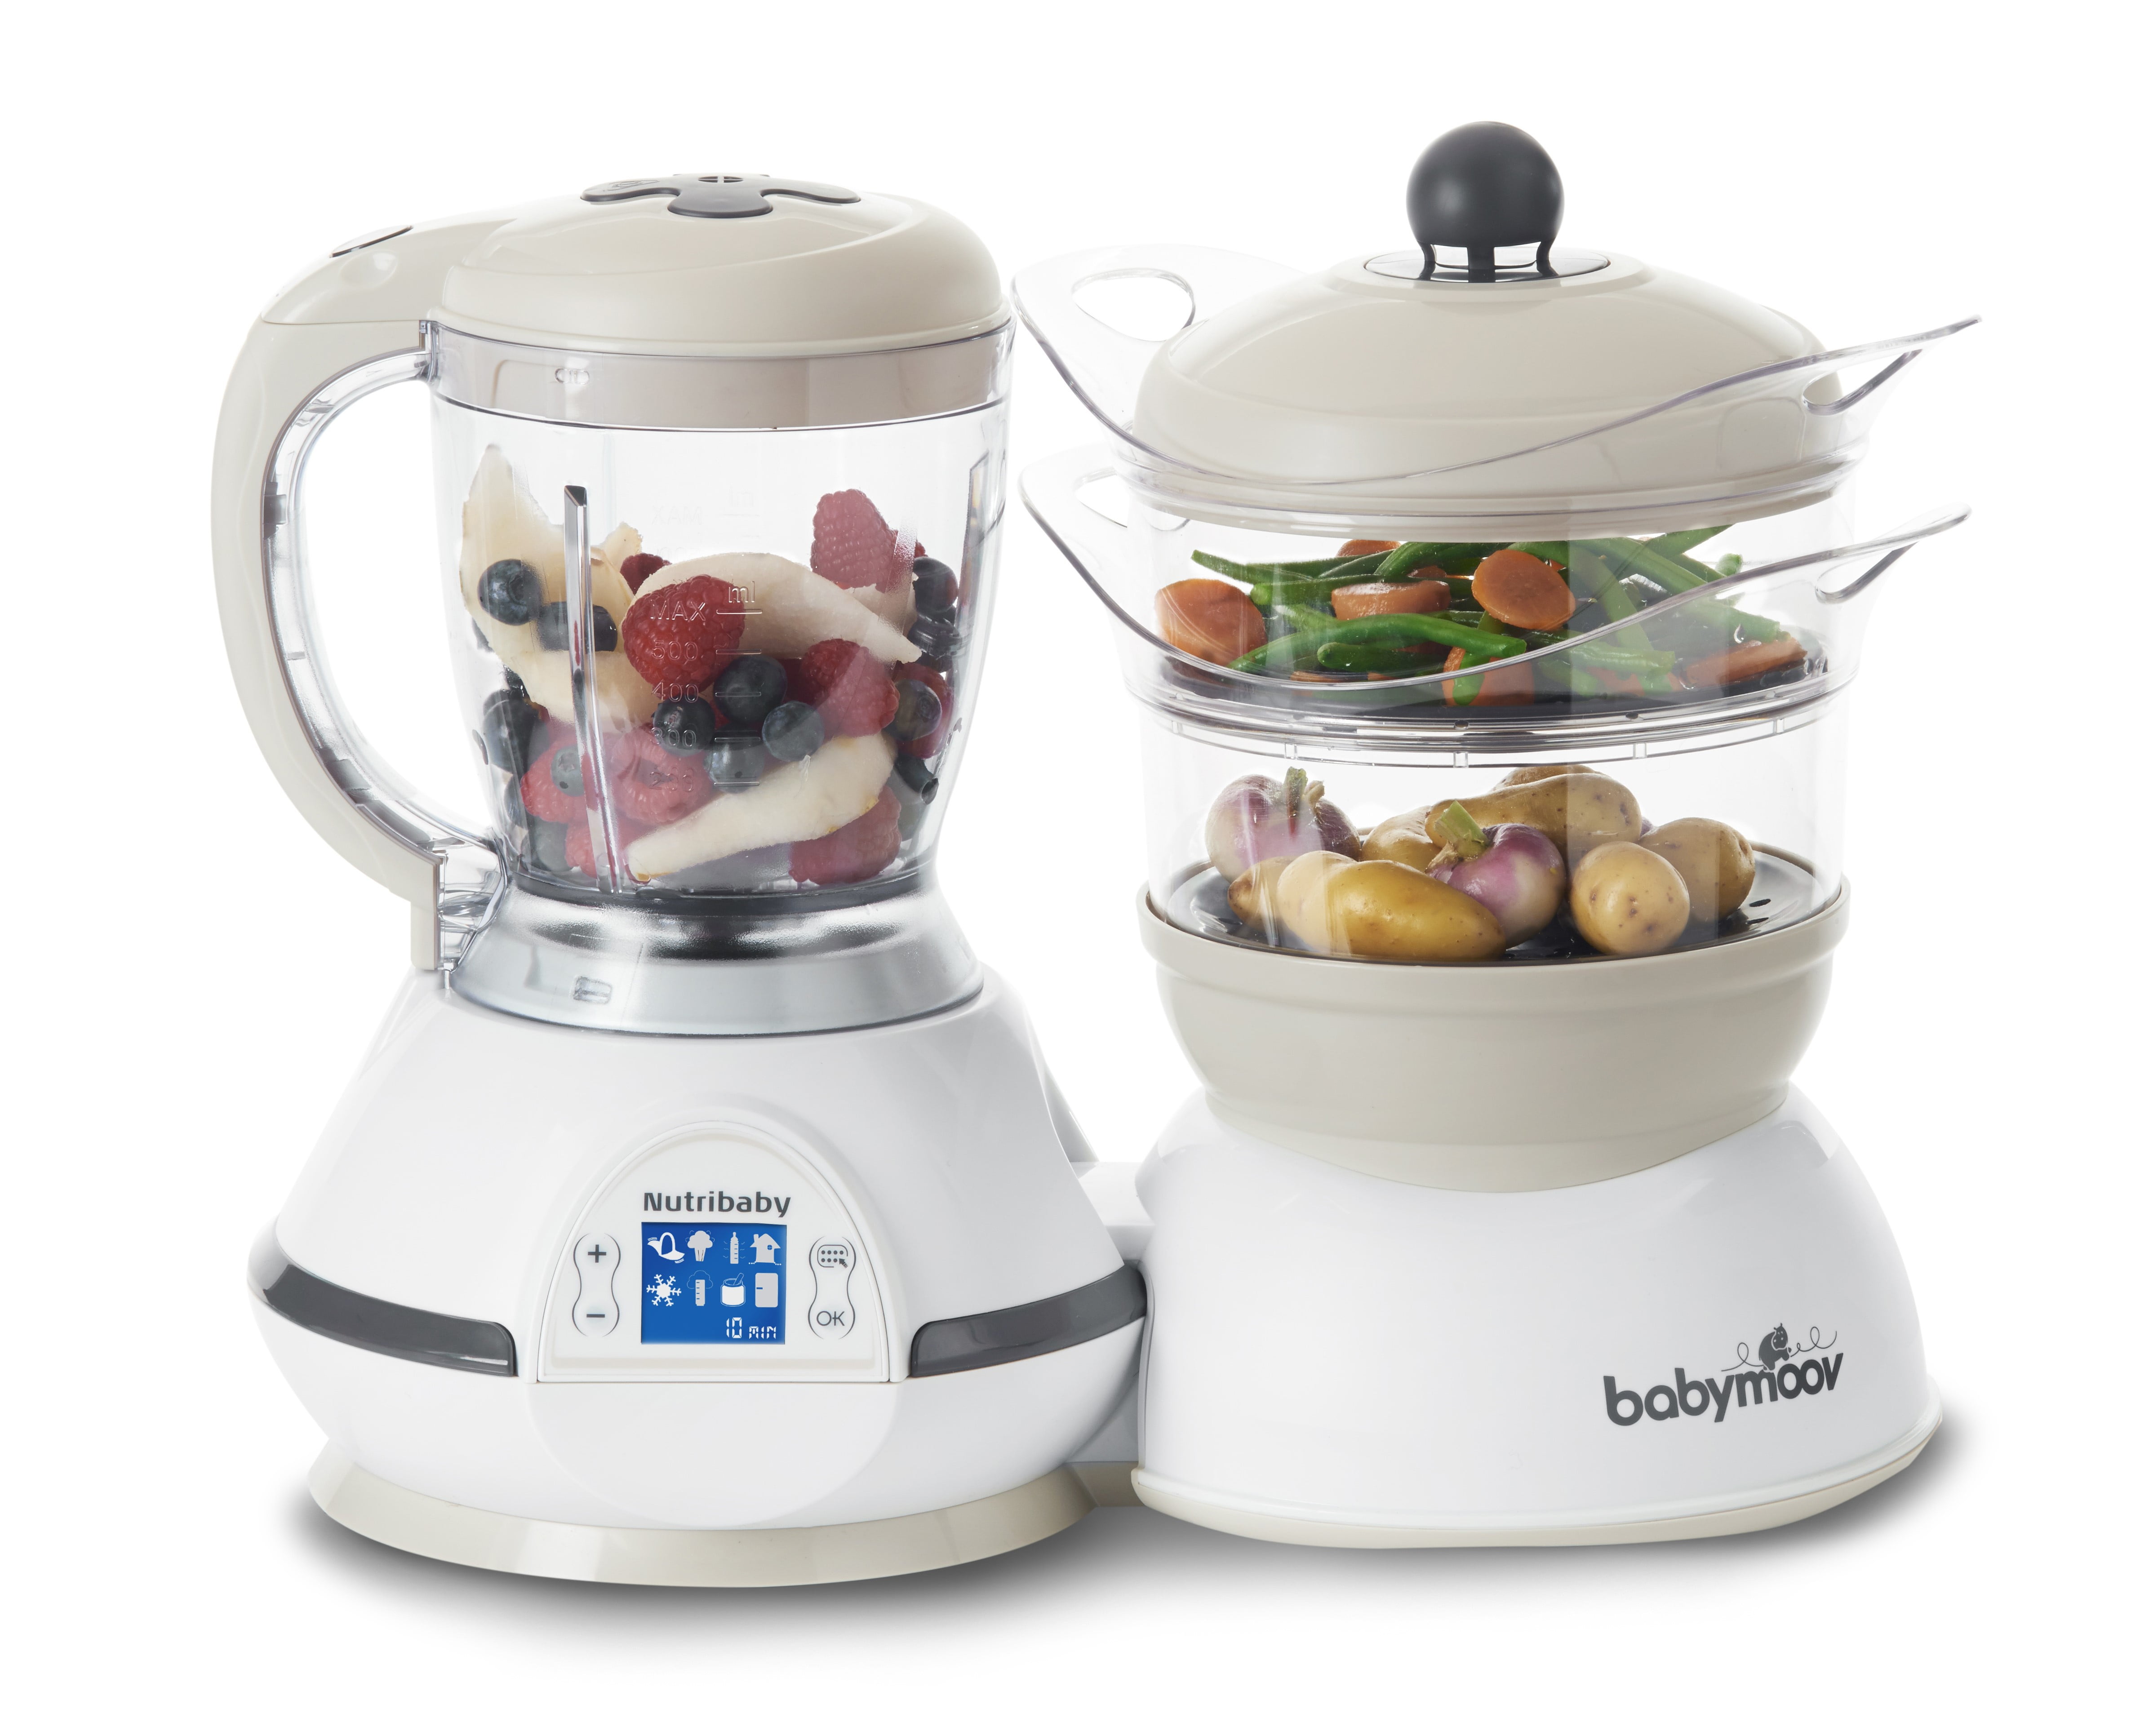 Babymoov Nutribaby - 5 in 1 Baby Food Maker with Steam Cooker, Blend &  Puree, Warmer, Defroster, Sterilizer (Cream)